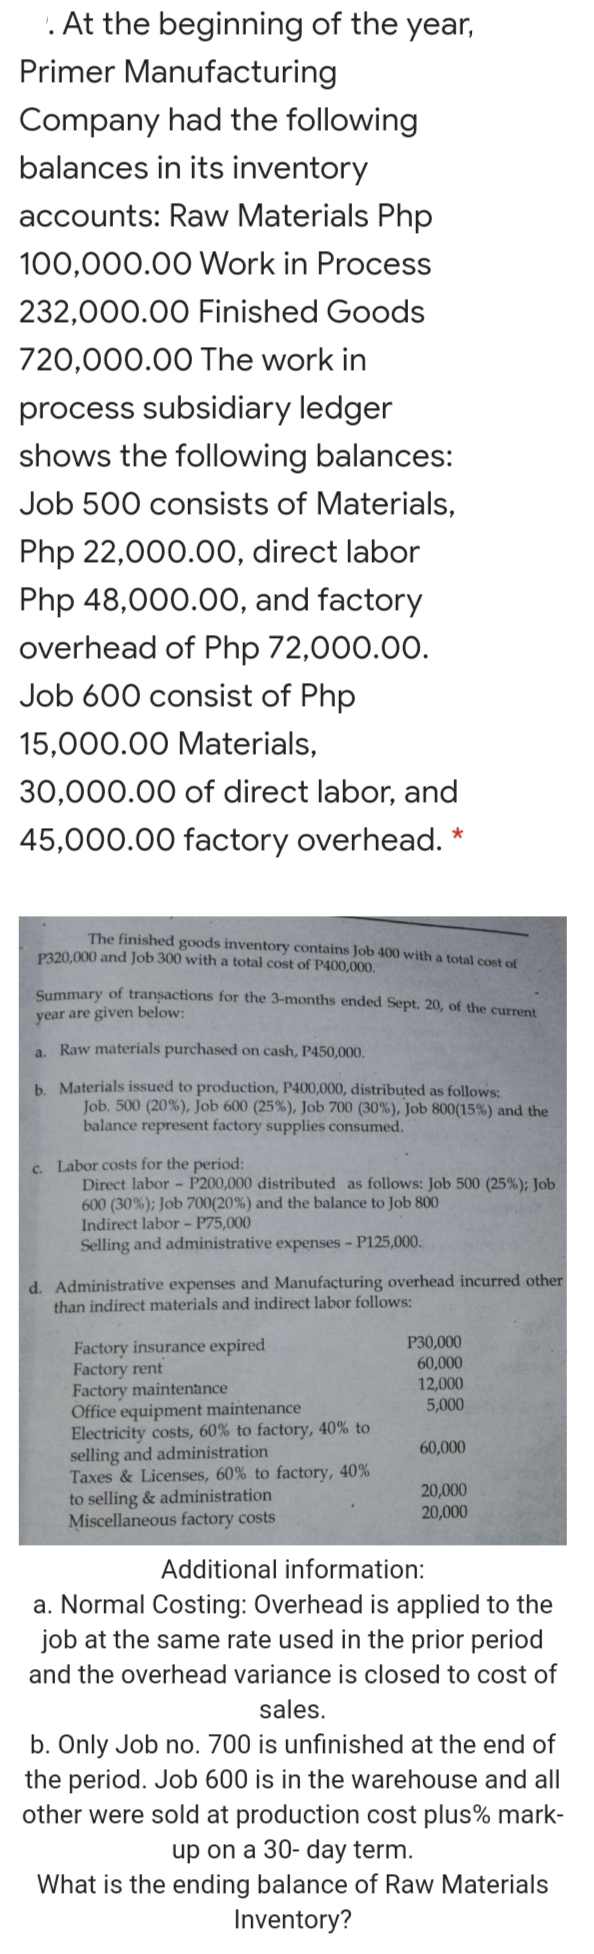 '. At the beginning of the year,
Primer Manufacturing
Company had the following
balances in its inventory
accounts: Raw Materials Php
100,000.00 Work in Process
232,000.00 Finished Goods
720,000.00 The work in
process subsidiary ledger
shows the following balances:
Job 500 consists of Materials,
Php 22,000.0O, direct labor
Php 48,000.00, and factory
overhead of Php 72,000.00.
Job 600 consist of Php
15,000.00 Materials,
30,000.00 of direct labor, and
45,000.00 factory overhead. *
The finished goods inventory contains Job 400 with a total cost of
P320,000 and Job 300 with a total cost of P400,000.
Summary of transactions for the 3-months ended Sept. 20, of the current
year are given below:
a. Raw materials purchased on cash, P450,000.
b. Materials issued to production, P400,000, distributed as follows:
Job. 500 (20%), Job 600 (25%), Job 700 (30%), Job 800(15%) and the
balance represent factory supplies consumed.
c. Labor costs for the period:
Direct labor - P200,000 distributed as follows: Job 500 (25%); Job
600 (30%); Job 700(20%) and the balance to Job 800
Indirect labor - P75,000
Selling and administrative expenses - P125,000.
d. Administrative expenses and Manufacturing overhead incurred other
than indirect materials and indirect labor follows:
P30,000
60,000
12,000
5,000
Factory insurance expired
Factory rent
Factory maintenance
Office equipment maintenance
Electricity costs, 60% to factory, 40% to
selling and administration
Taxes & Licenses, 60% to factory, 40%
to selling & administration
Miscellaneous factory costs
60,000
20,000
20,000
Additional information:
a. Normal Costing: Overhead is applied to the
job at the same rate used in the prior period
and the overhead variance is closed to cost of
sales.
b. Only Job no. 700 is unfinished at the end of
the period. Job 600 is in the warehouse and all
other were sold at production cost plus% mark-
up on a 30- day term.
What is the ending balance of Raw Materials
Inventory?
